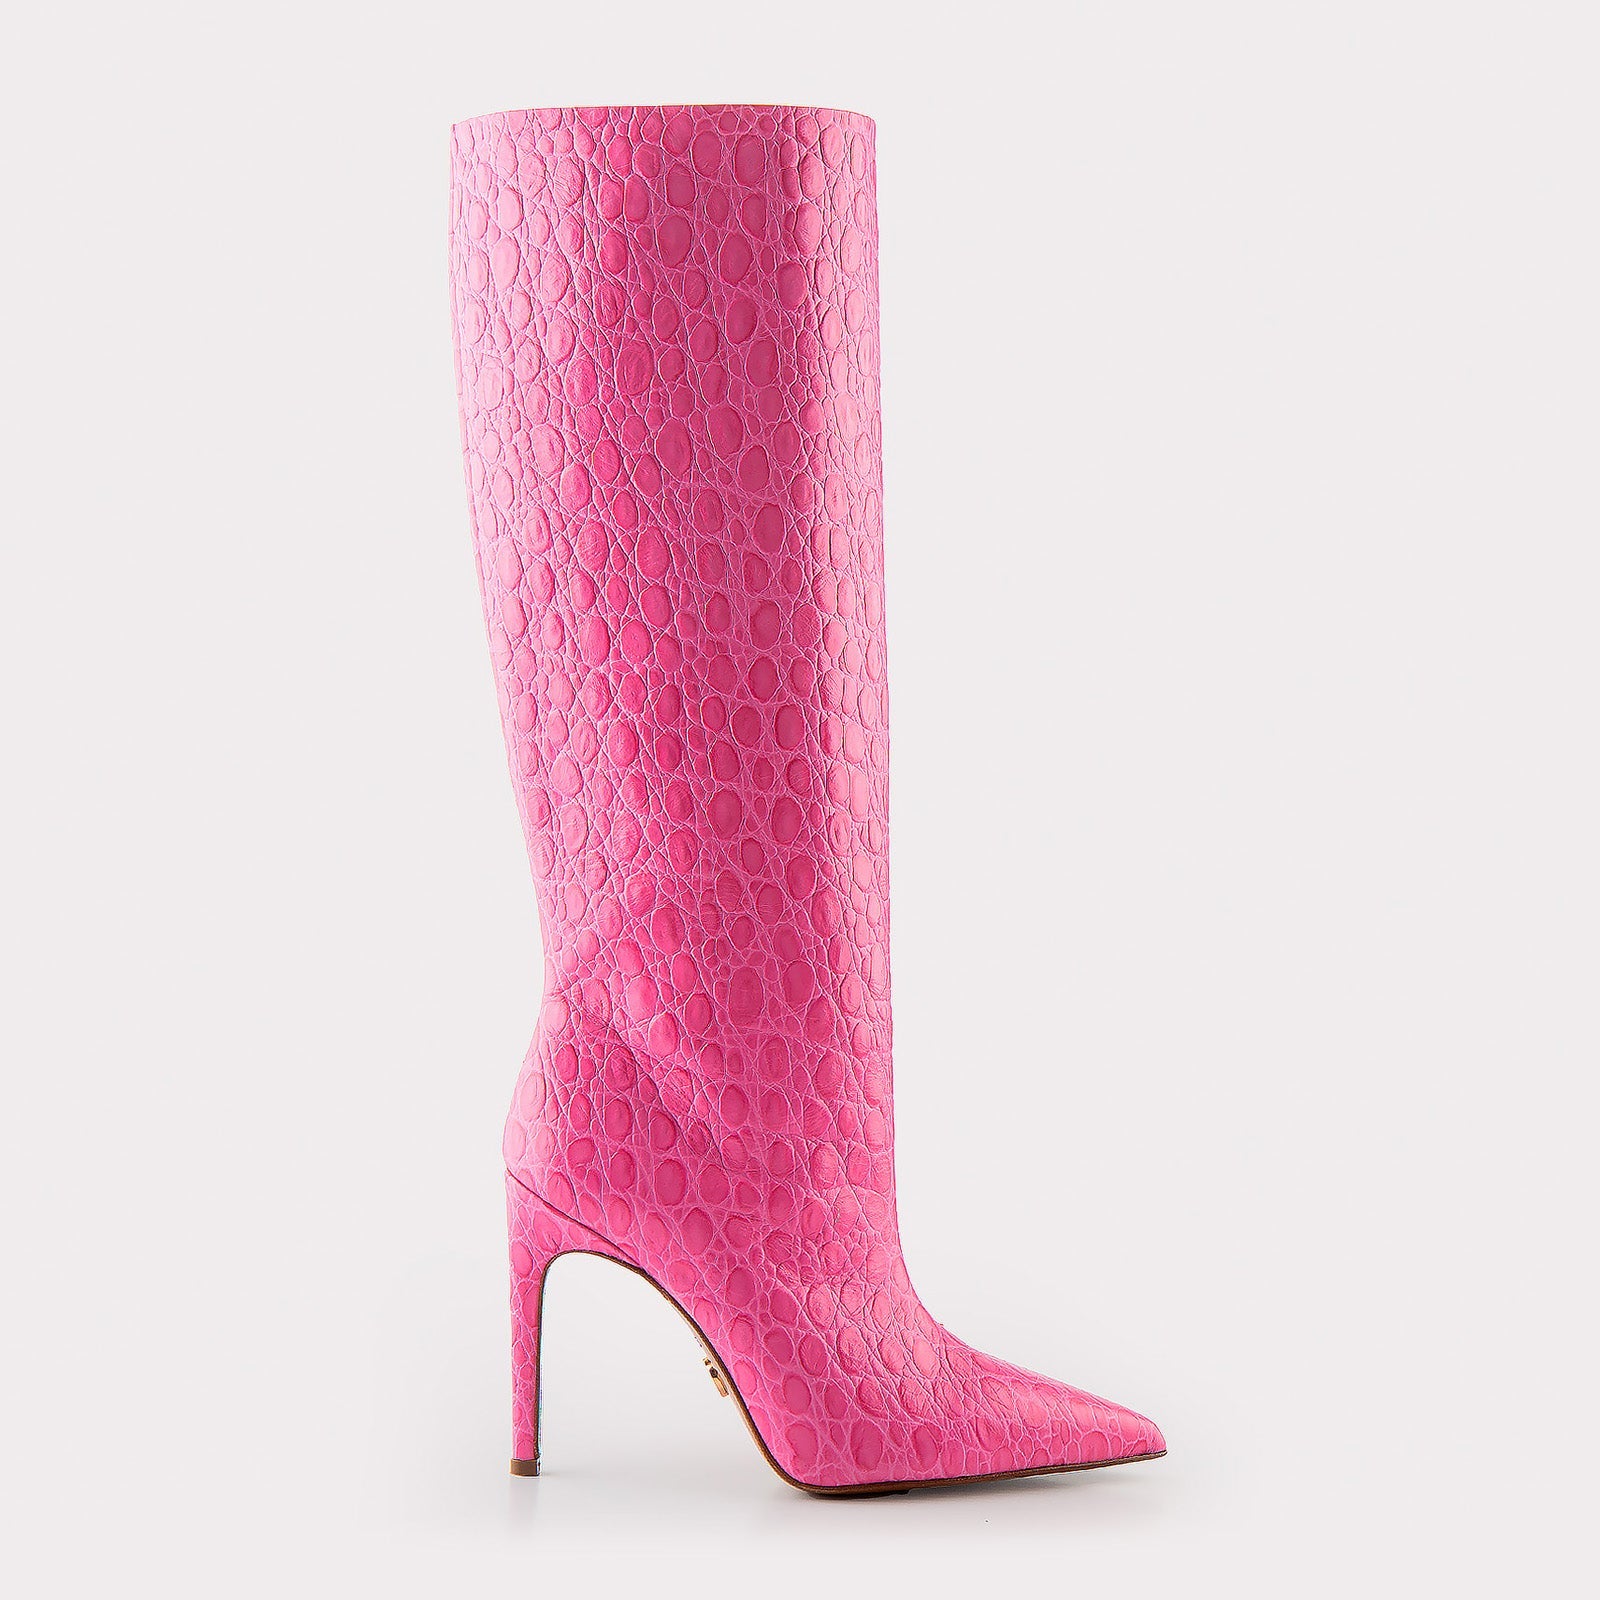 TEXTURED LEATHER BOOTS ANASTASIA HOT PINK